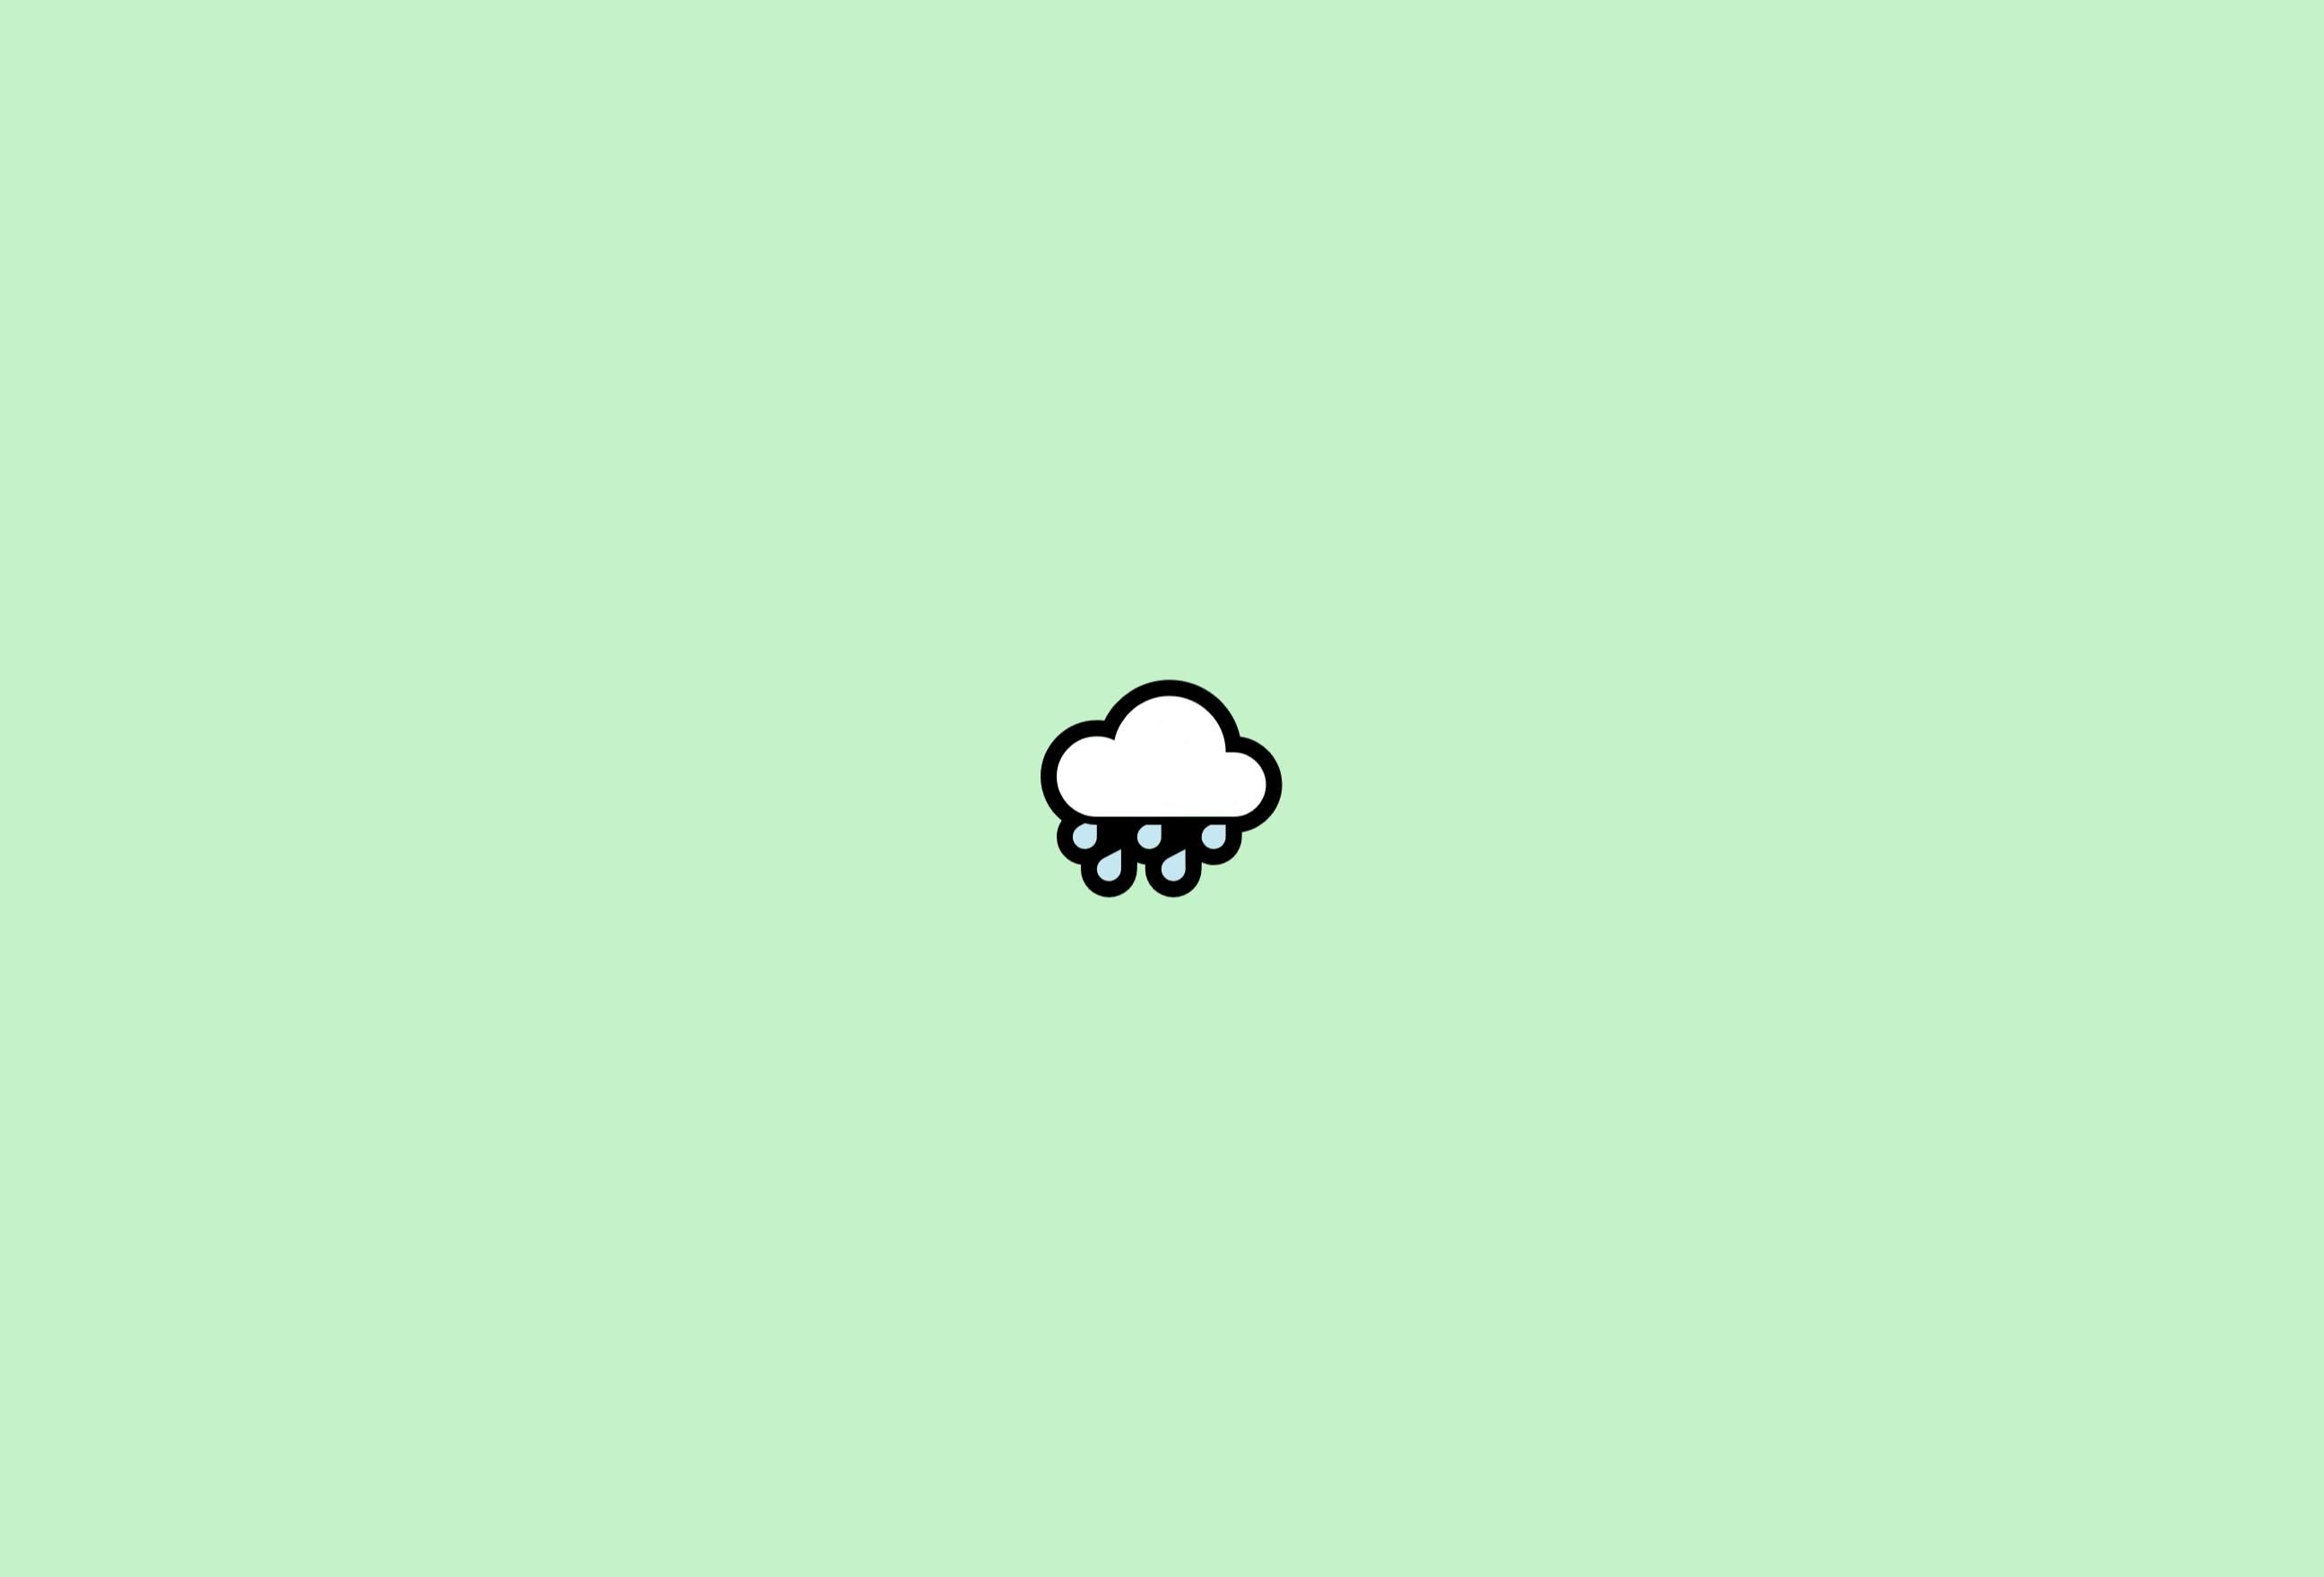 A simple icon of a cloud with raindrops on a green background - Mint green, pastel green